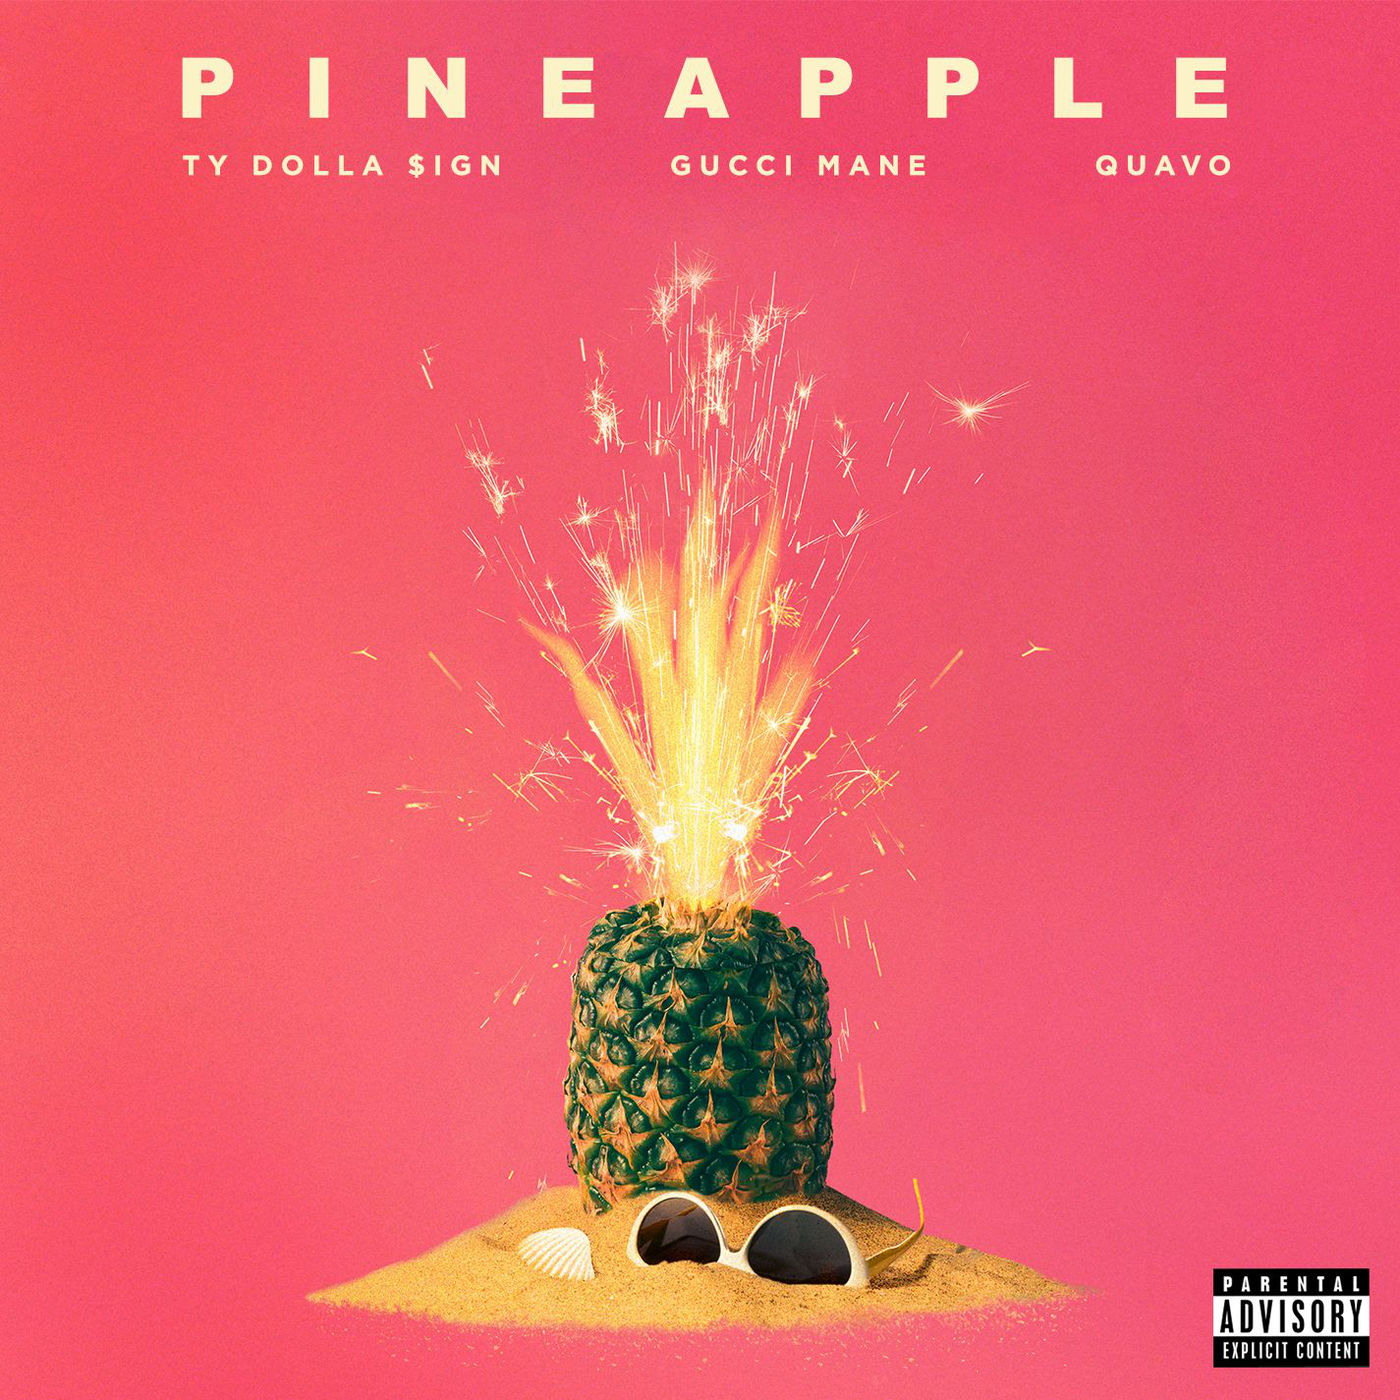 New Music: Ty Dolla $ign – “Pineapple” Feat. Gucci Mane & Quavo [LISTEN]